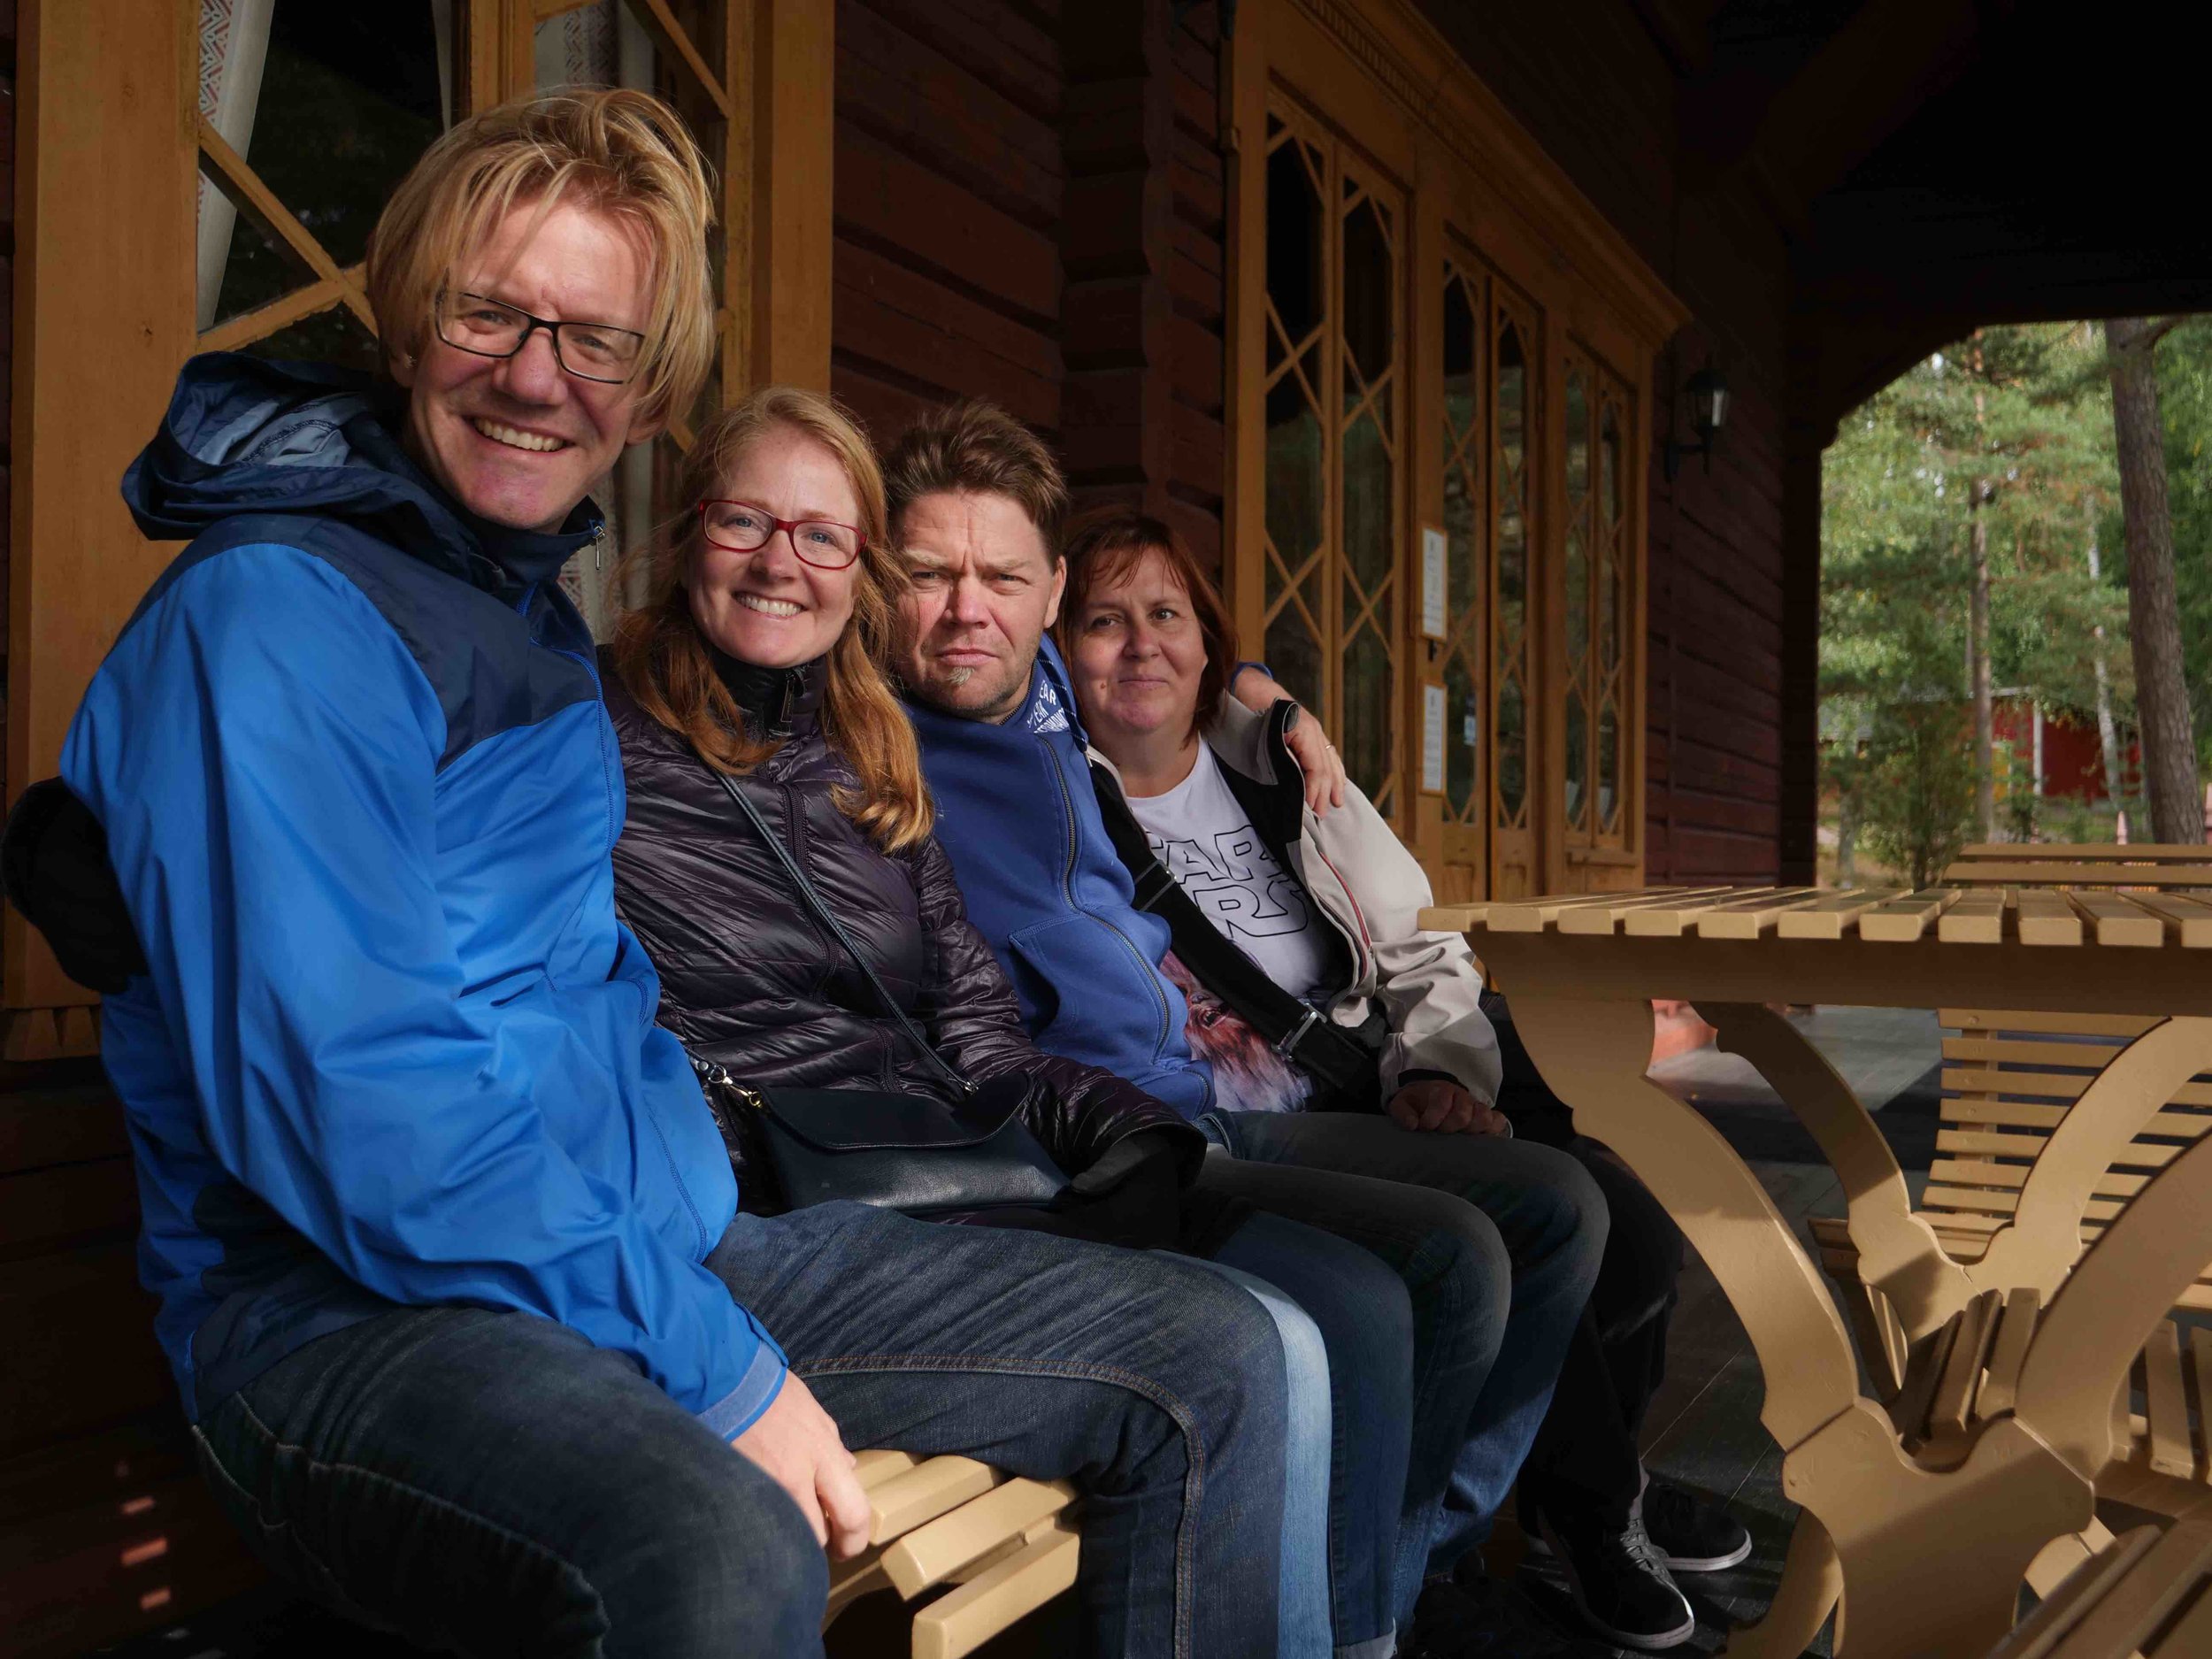  Emily and I with my cousin, Esa, and his wife, Sari at the Russian Czar’s fishing lodge.  Finland was part of Russia until Finland declared independence in 1947. Lenin was in a good mood that day and decided to let it slide. 